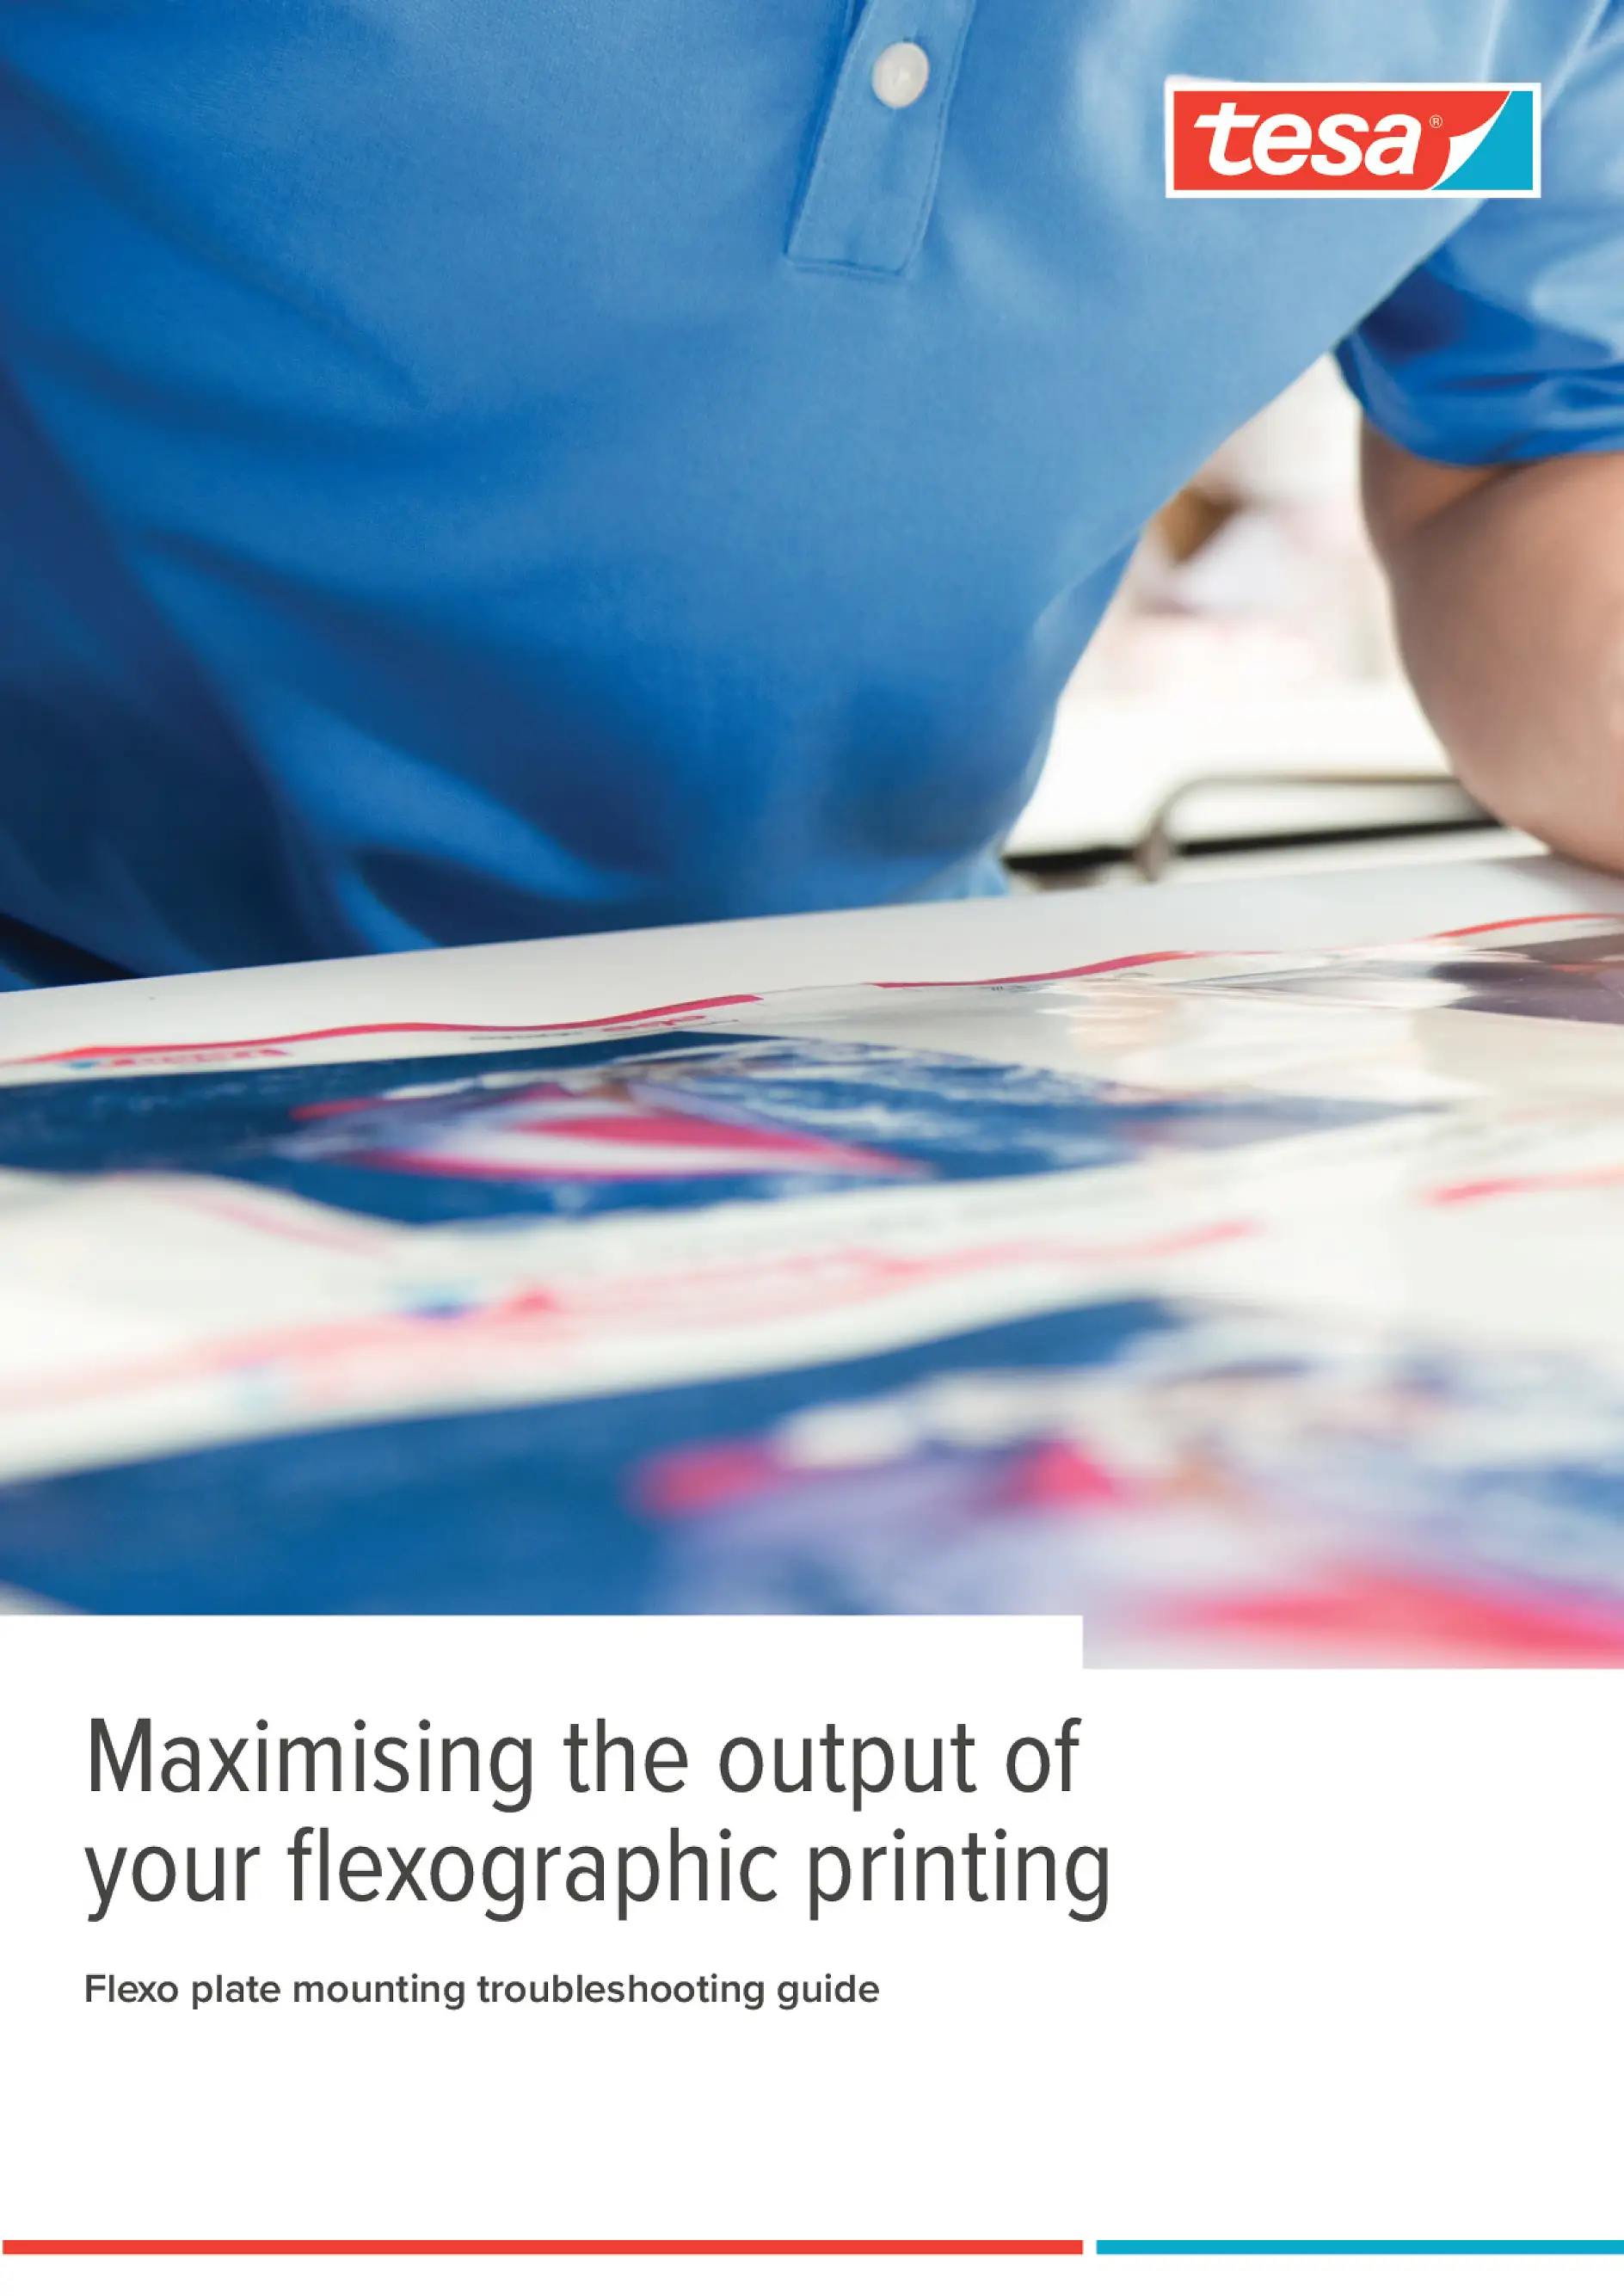 Whitepaper_Maximising The Output of Your Flexographic Printing_2021